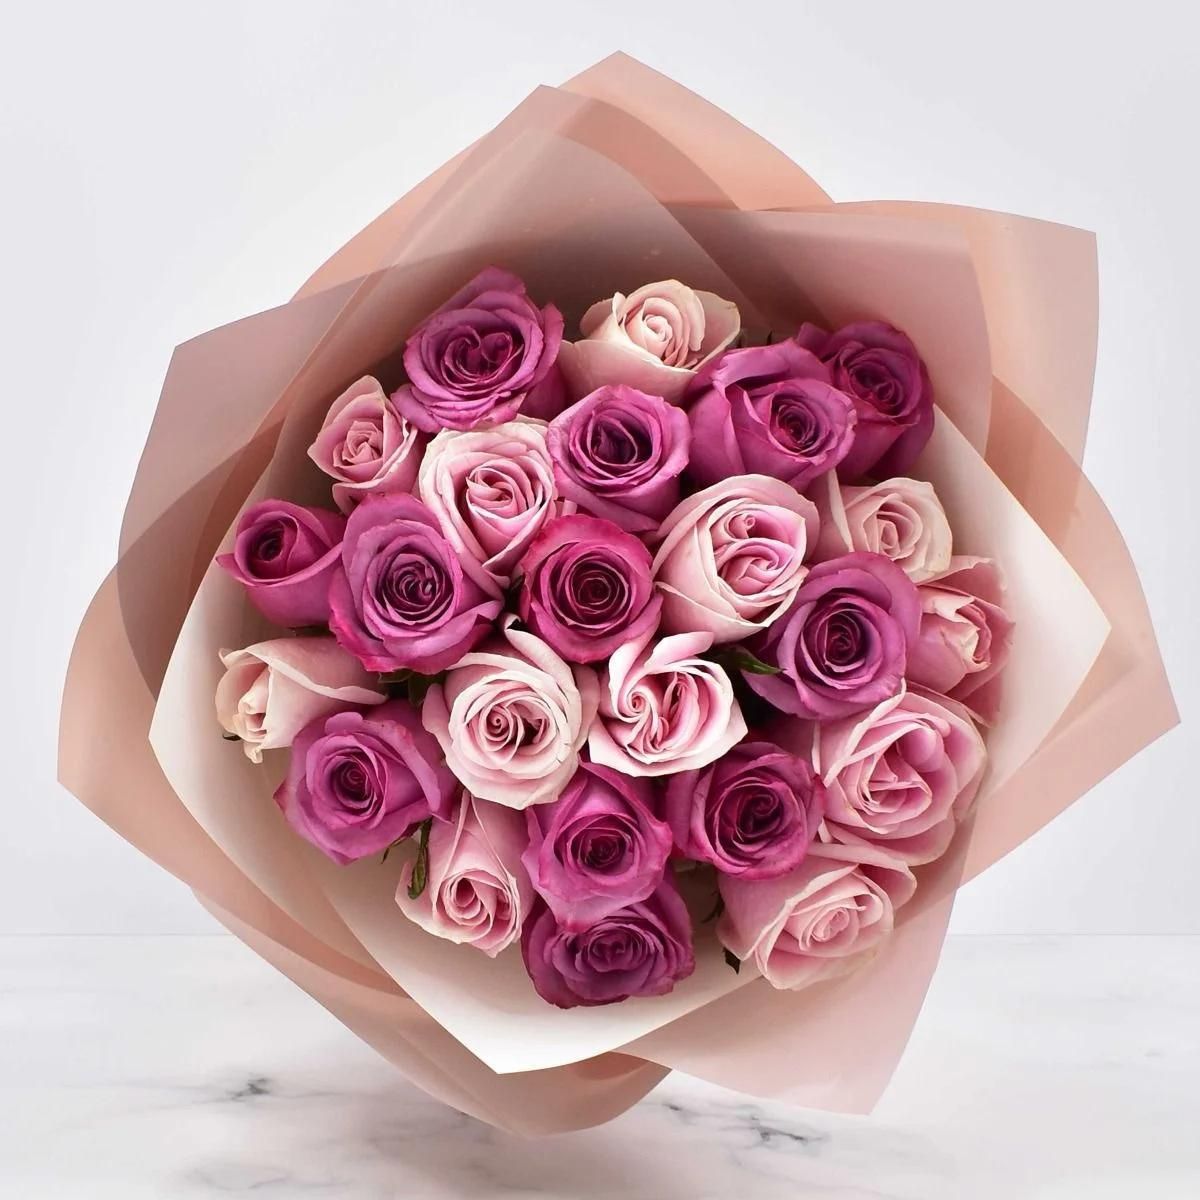 Pink rose bouquet and their meaning